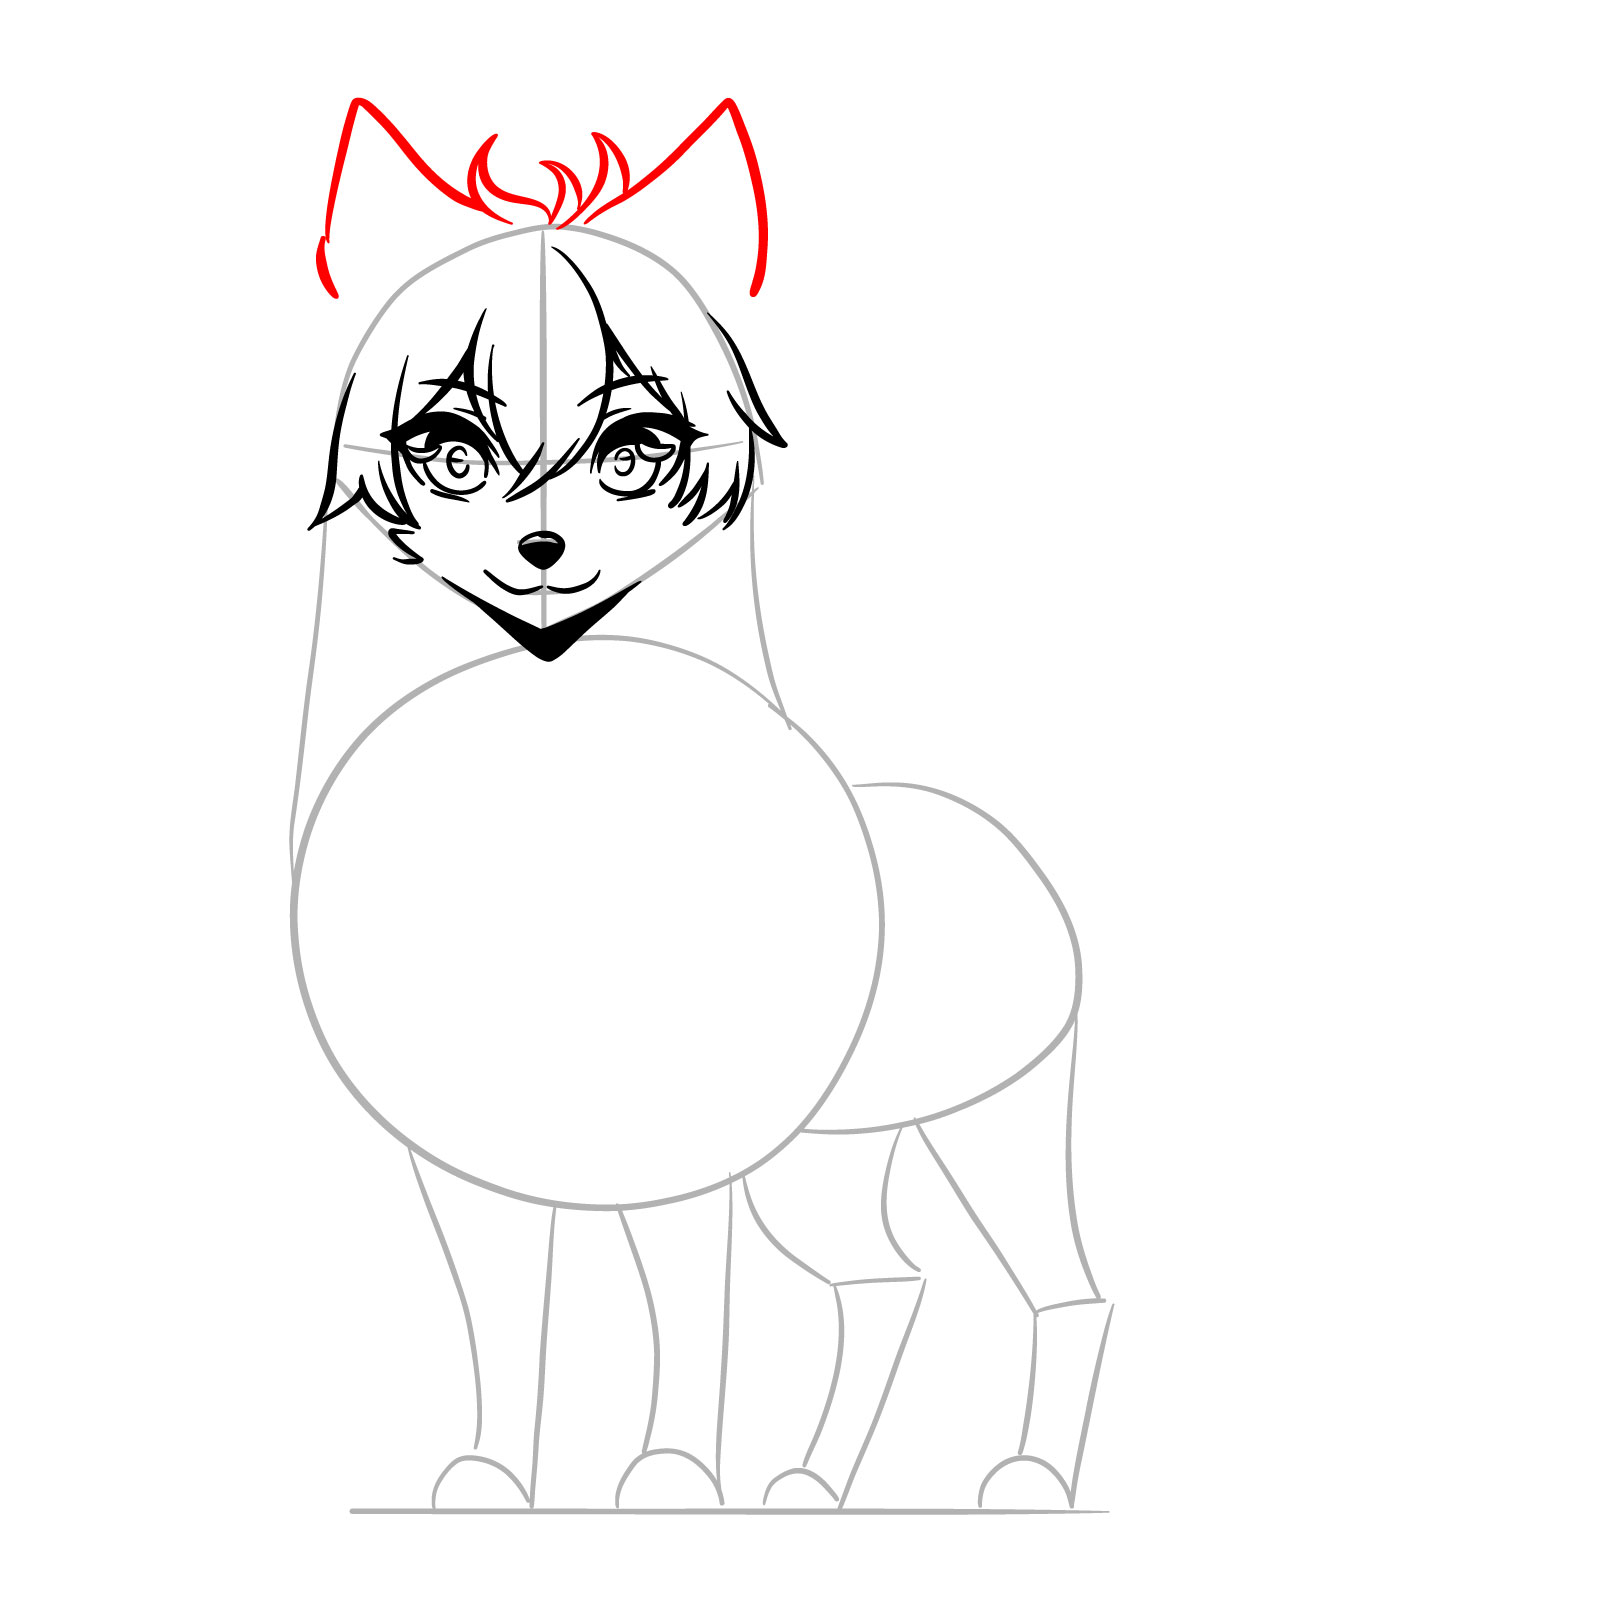 Defining the ears and forelock of the anime wolf sketch - step 08